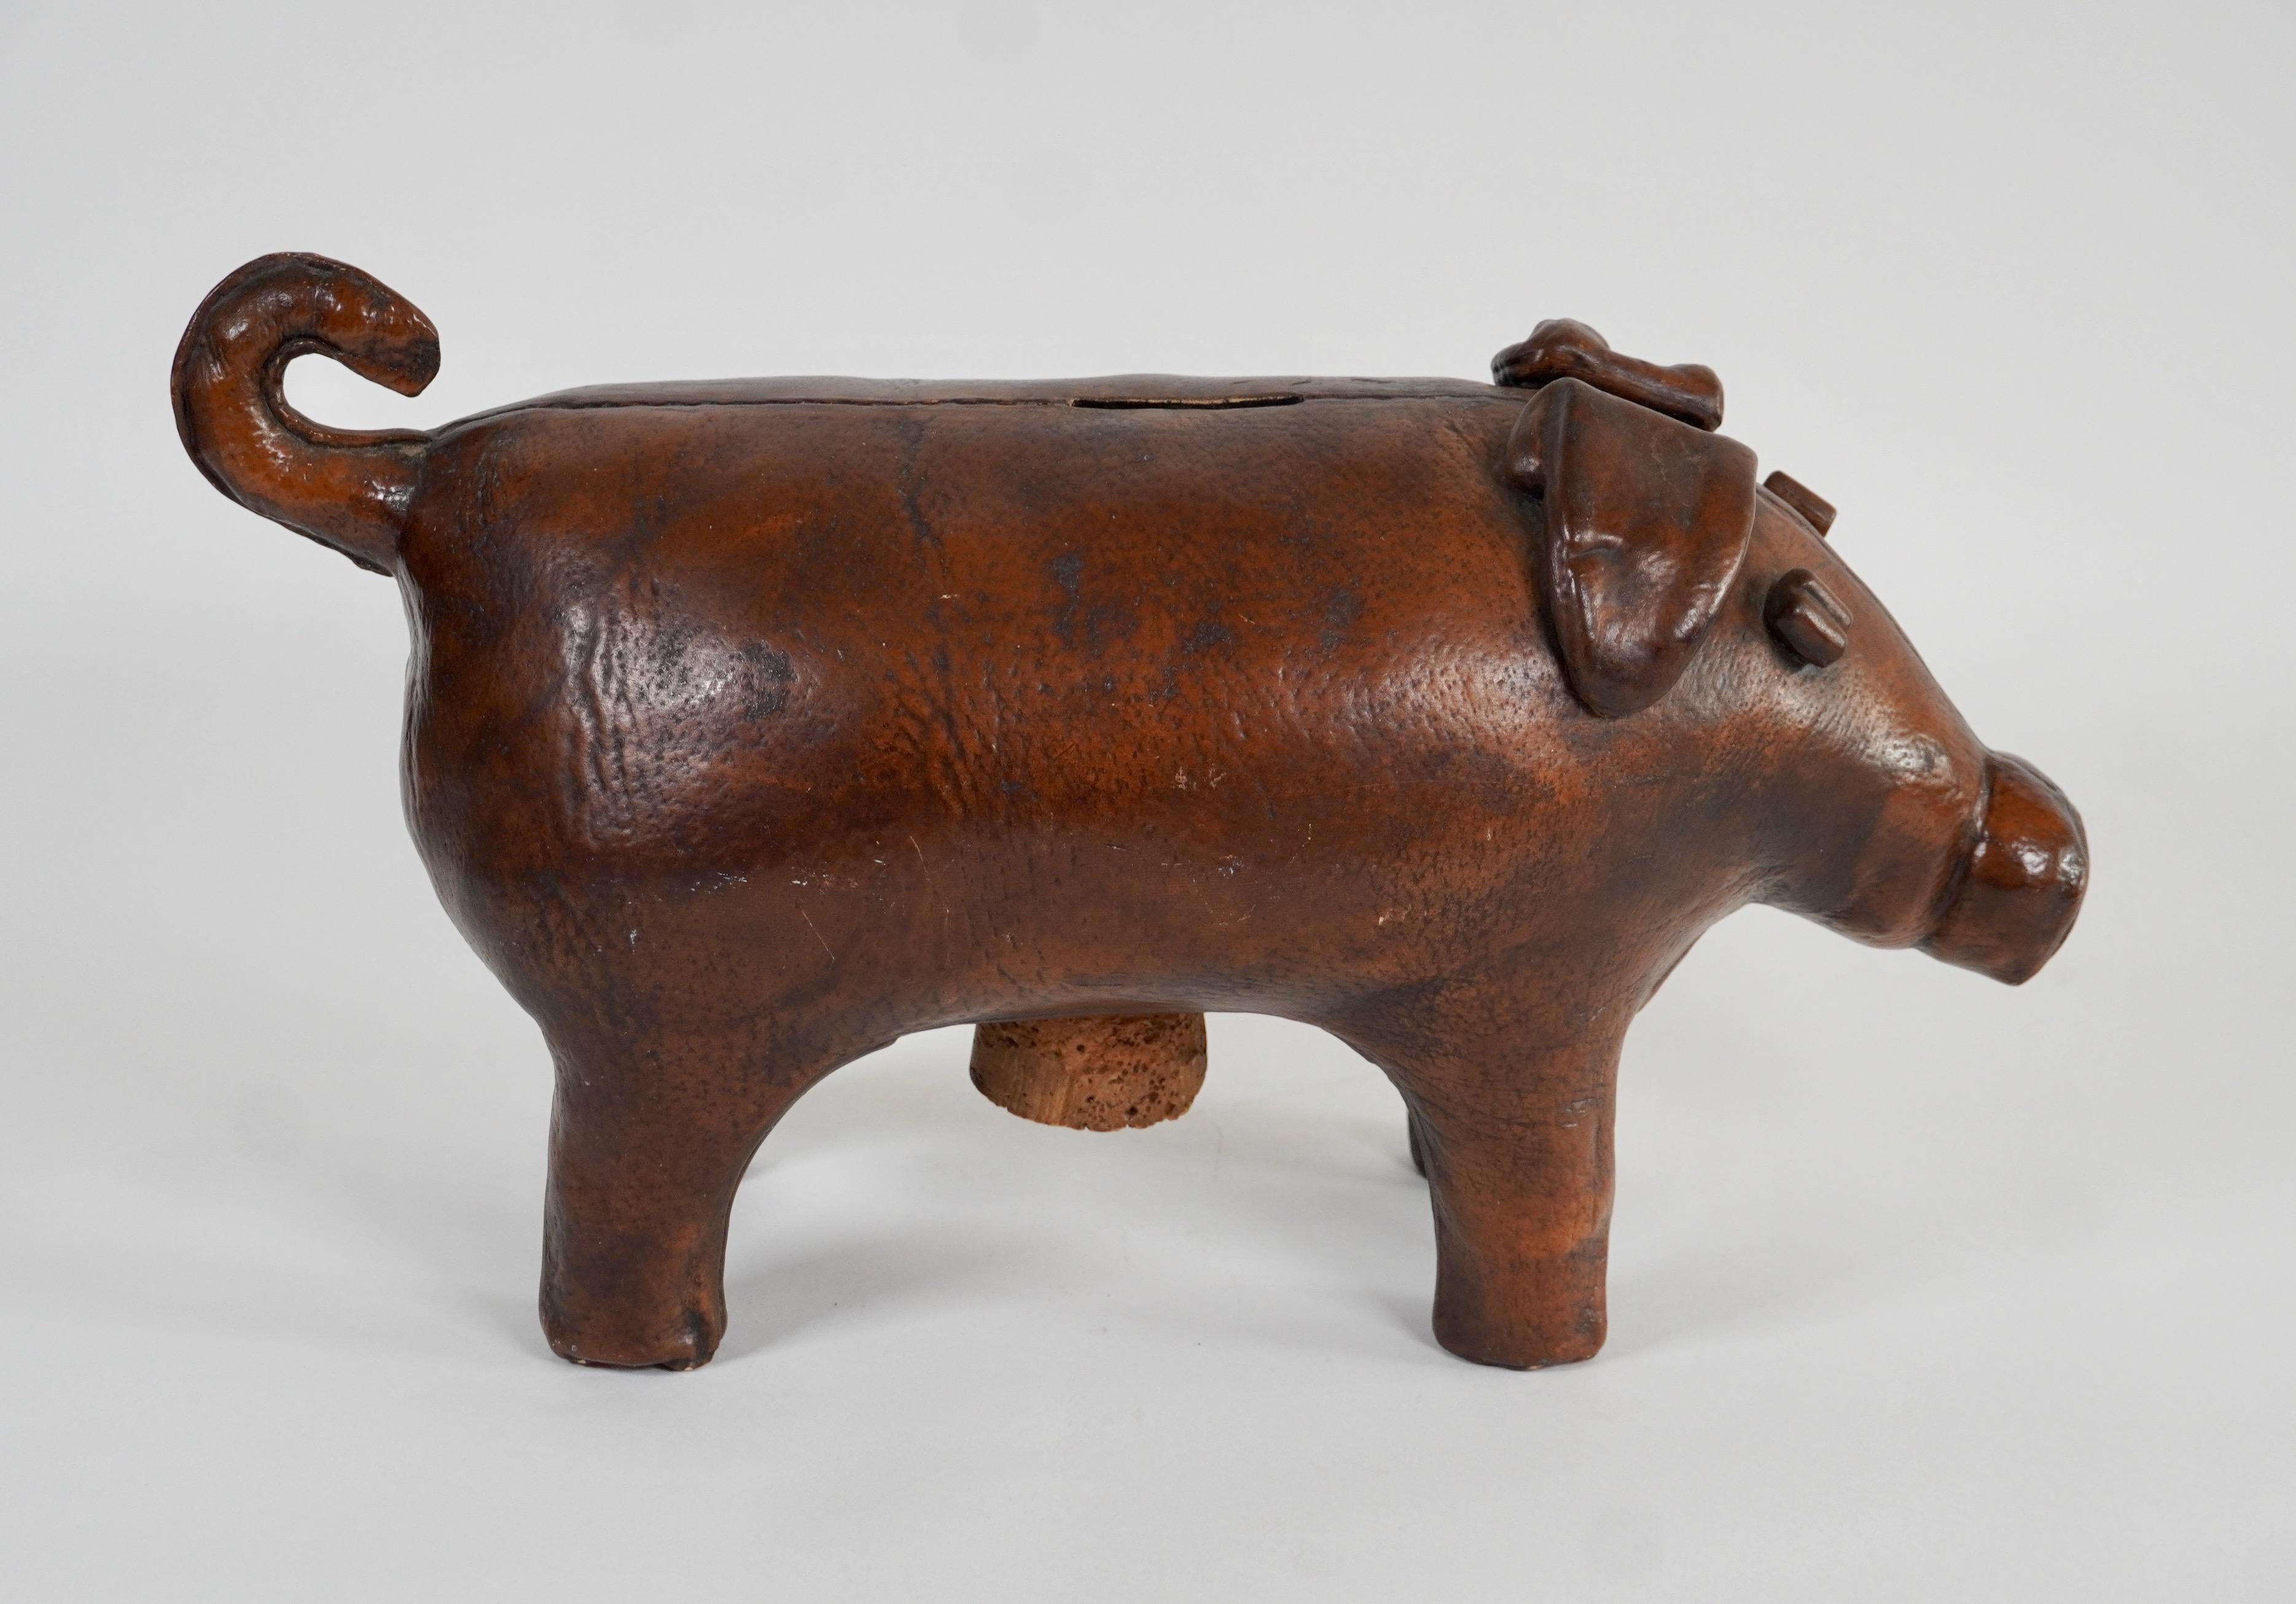 Realistic Ceramic Piggy Bank in the Style of an Omersa Leather Pig 1